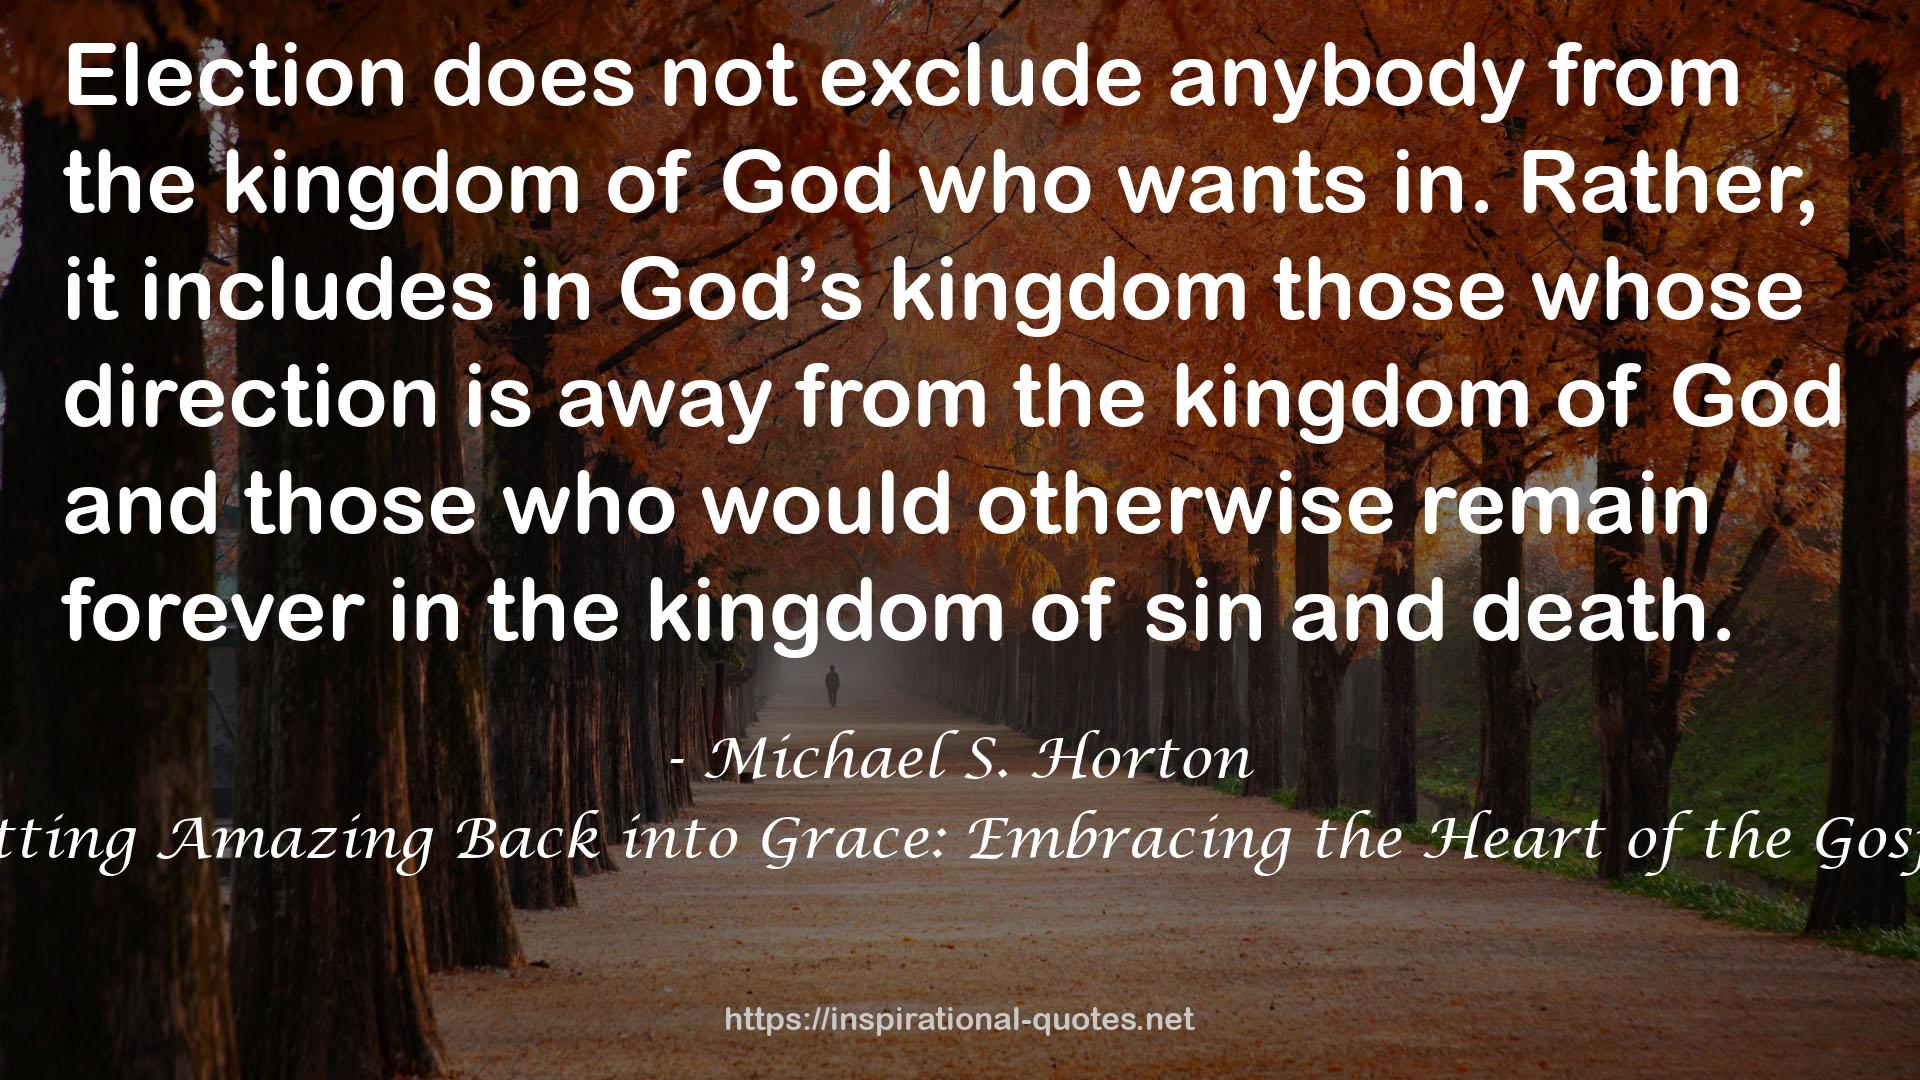 Putting Amazing Back into Grace: Embracing the Heart of the Gospel QUOTES